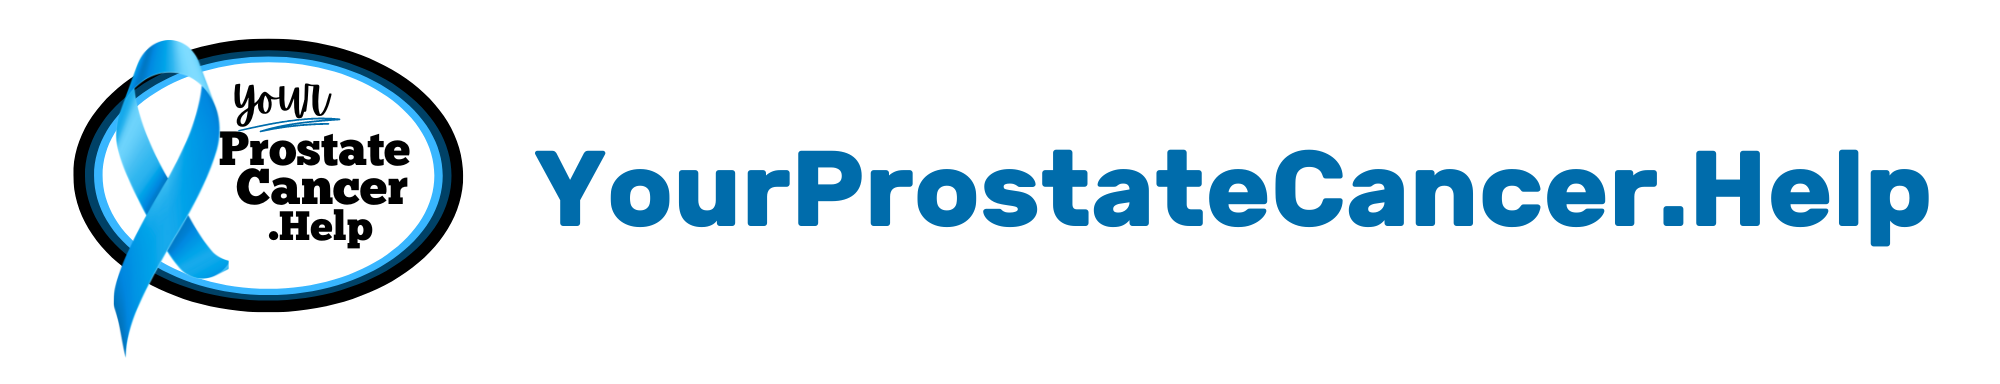 Your Prostate Cancer. Help